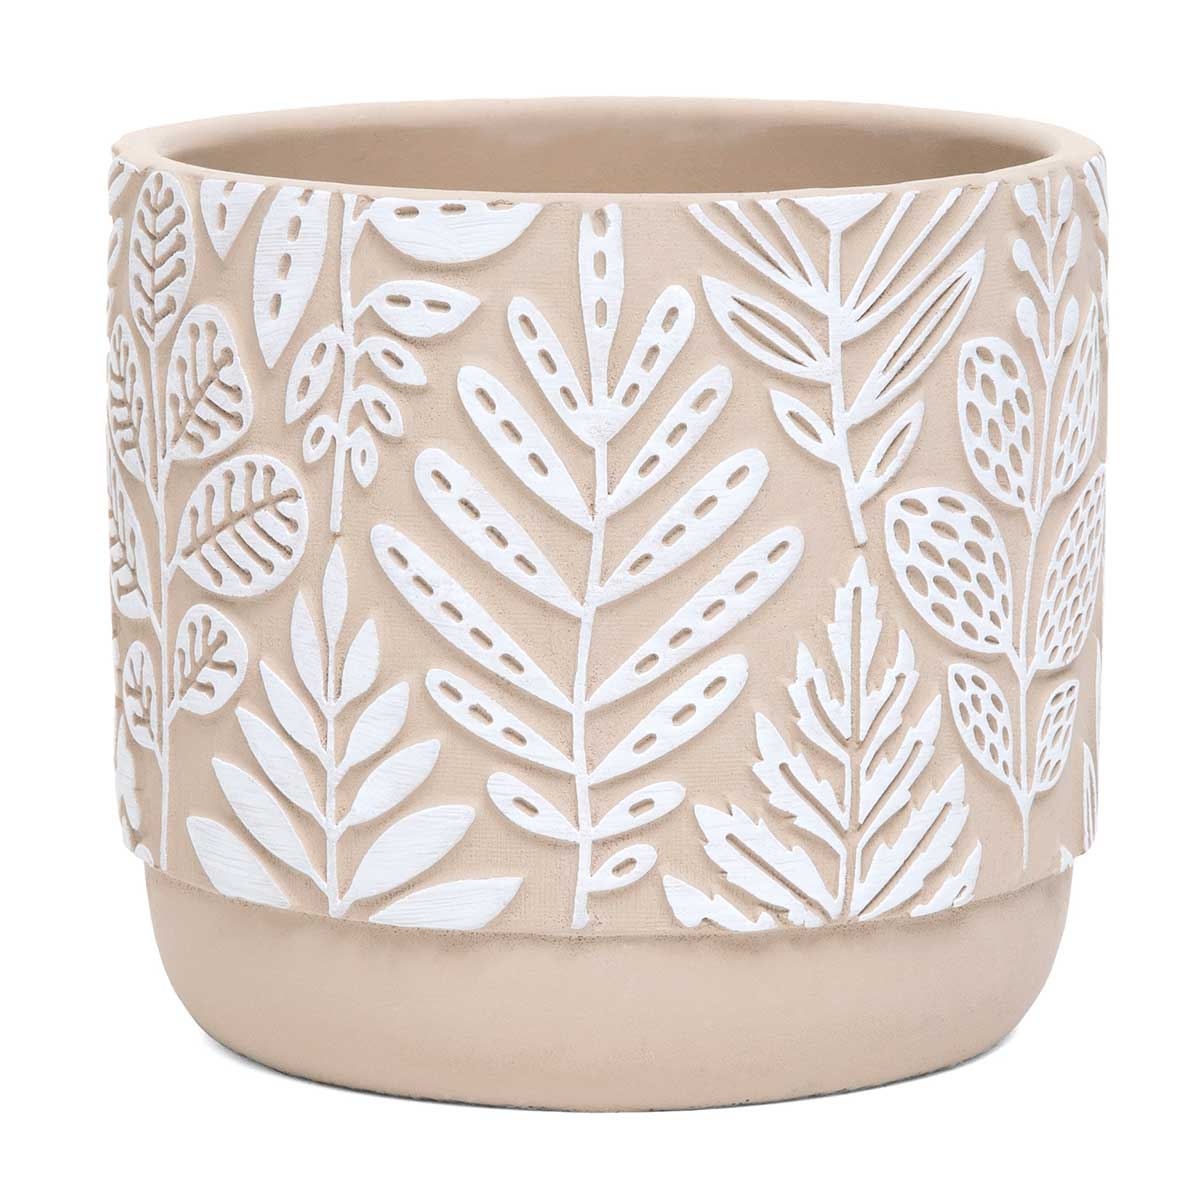 POT MULTI LEAF LARGE 5.5IN X 5IN SAND/WHITE CONCRETE - Click Image to Close